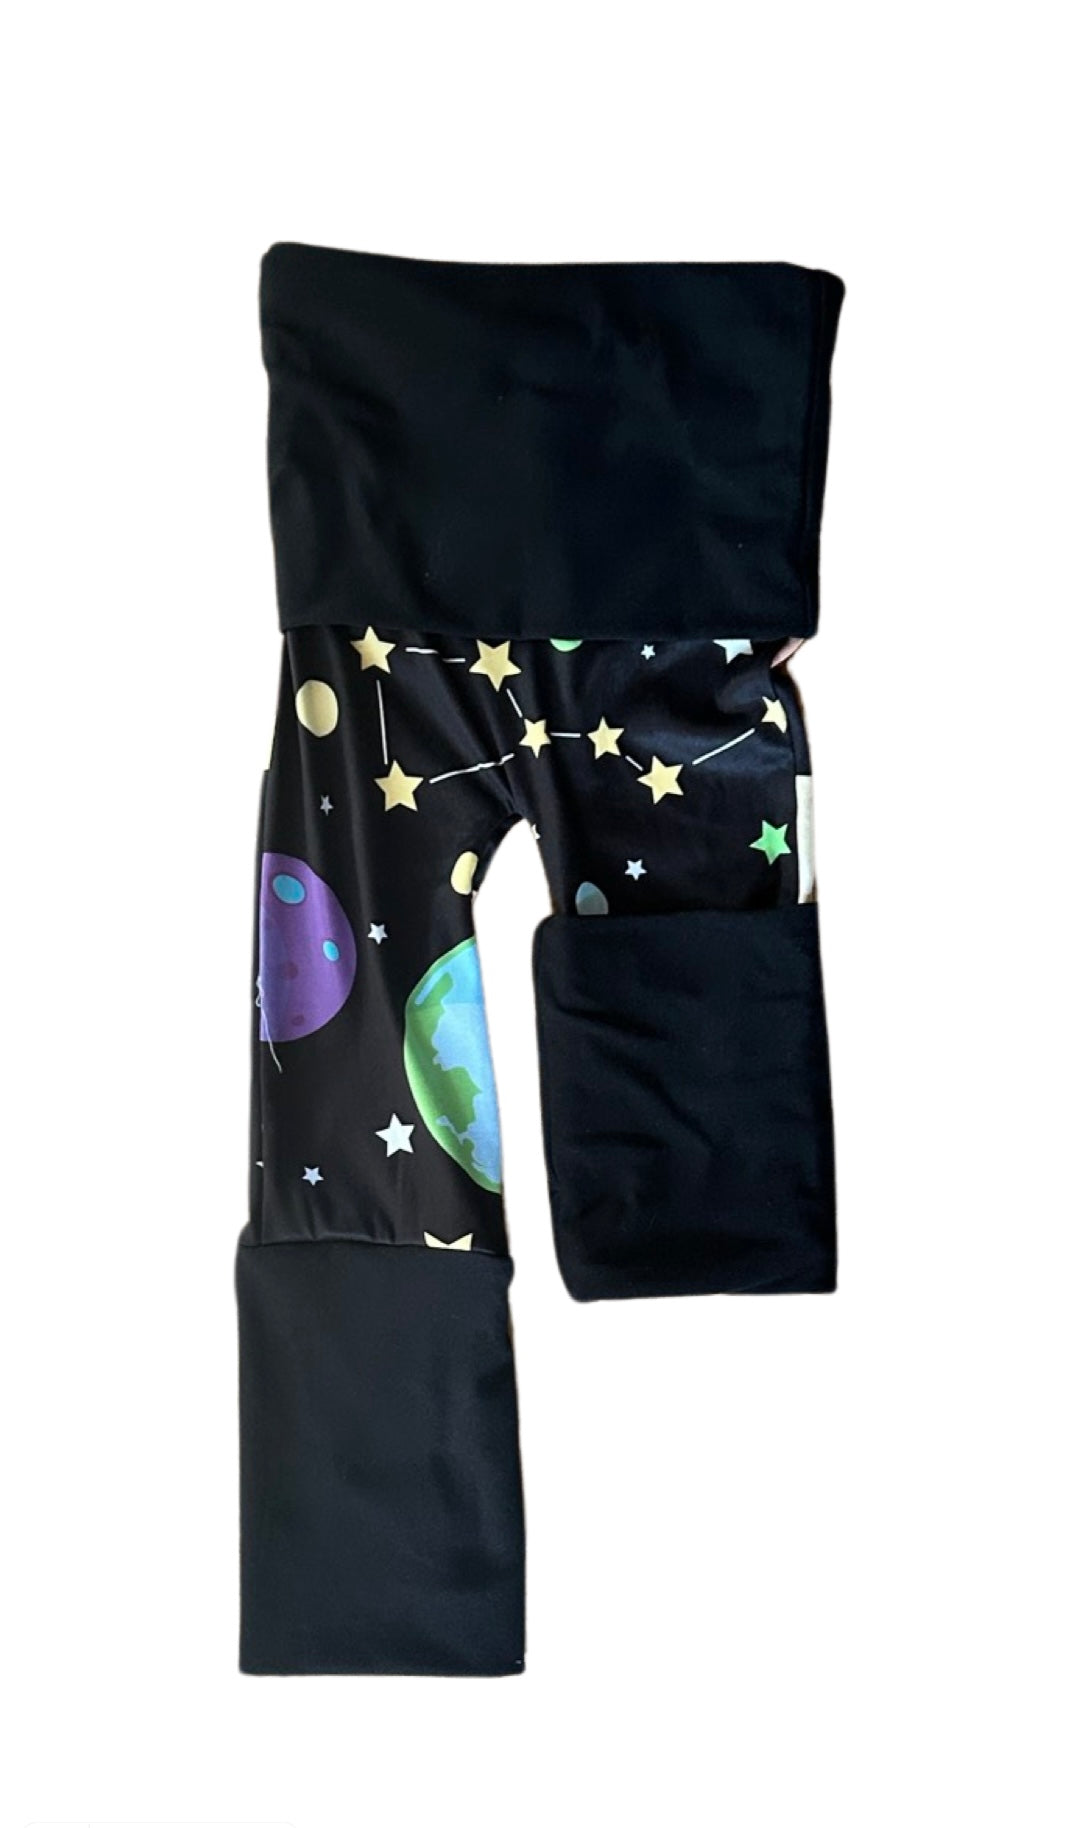 Adjustable Pants - Outer Space with Black